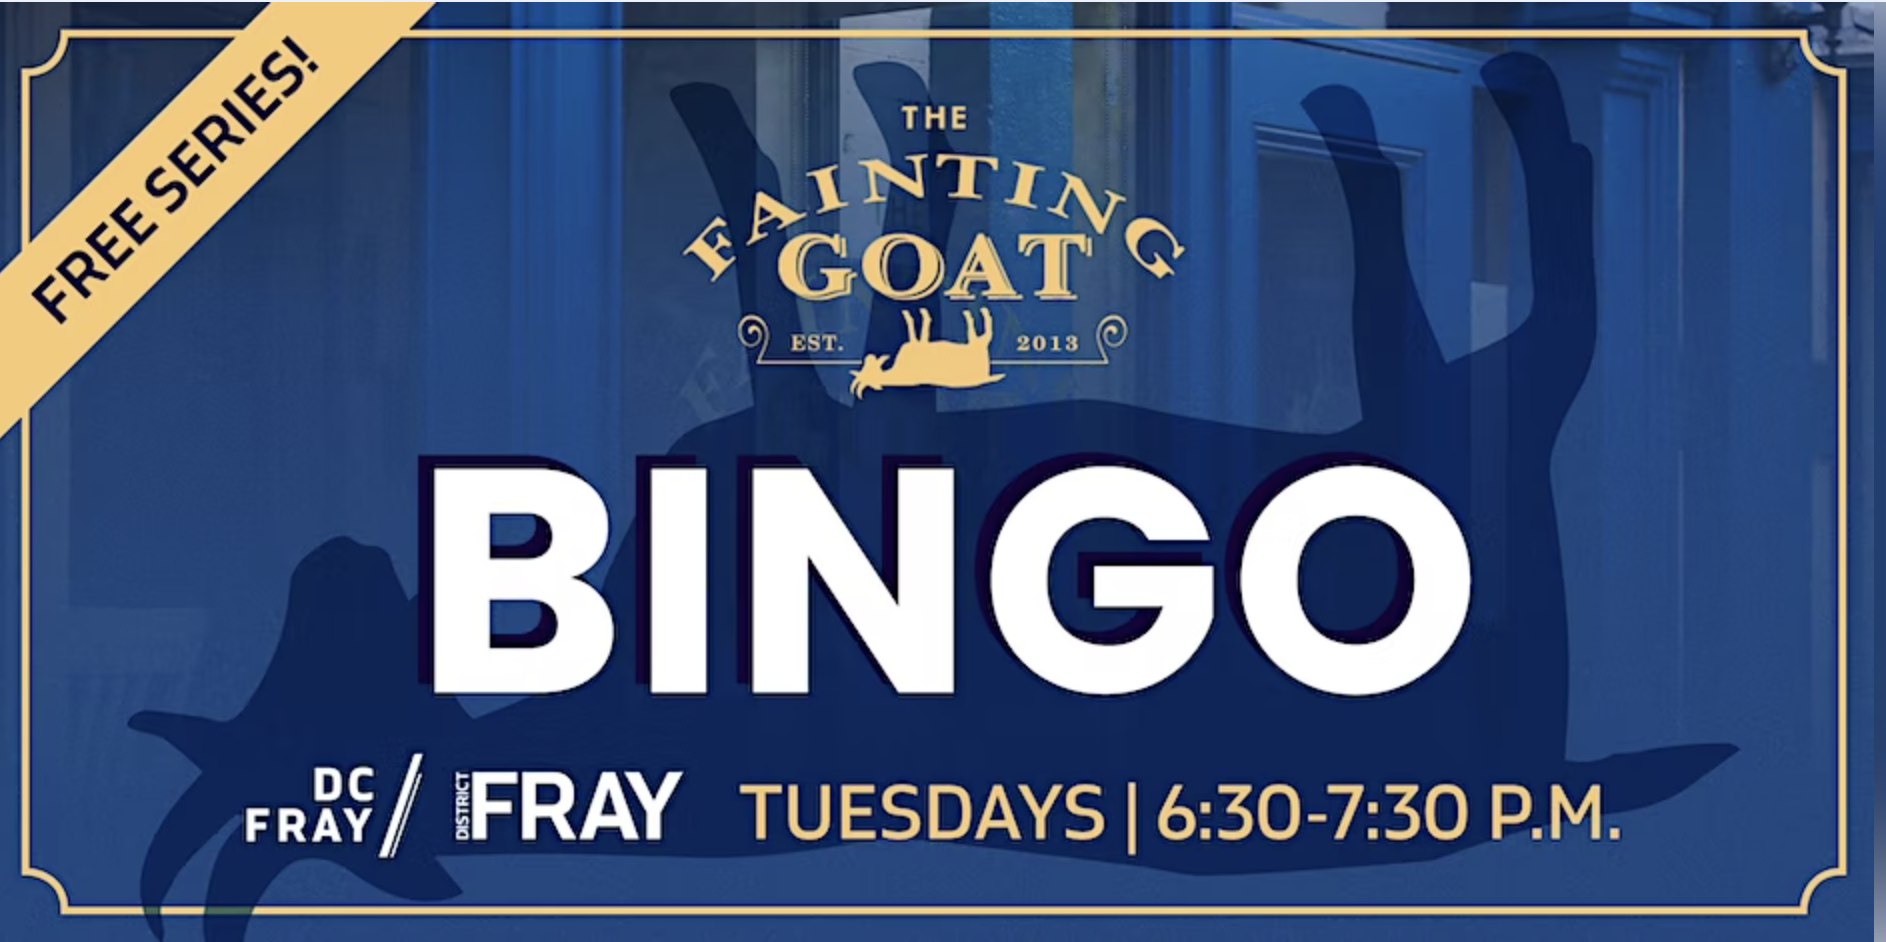 Free Weekly Bingo Series at The Fainting Goat // 12.13